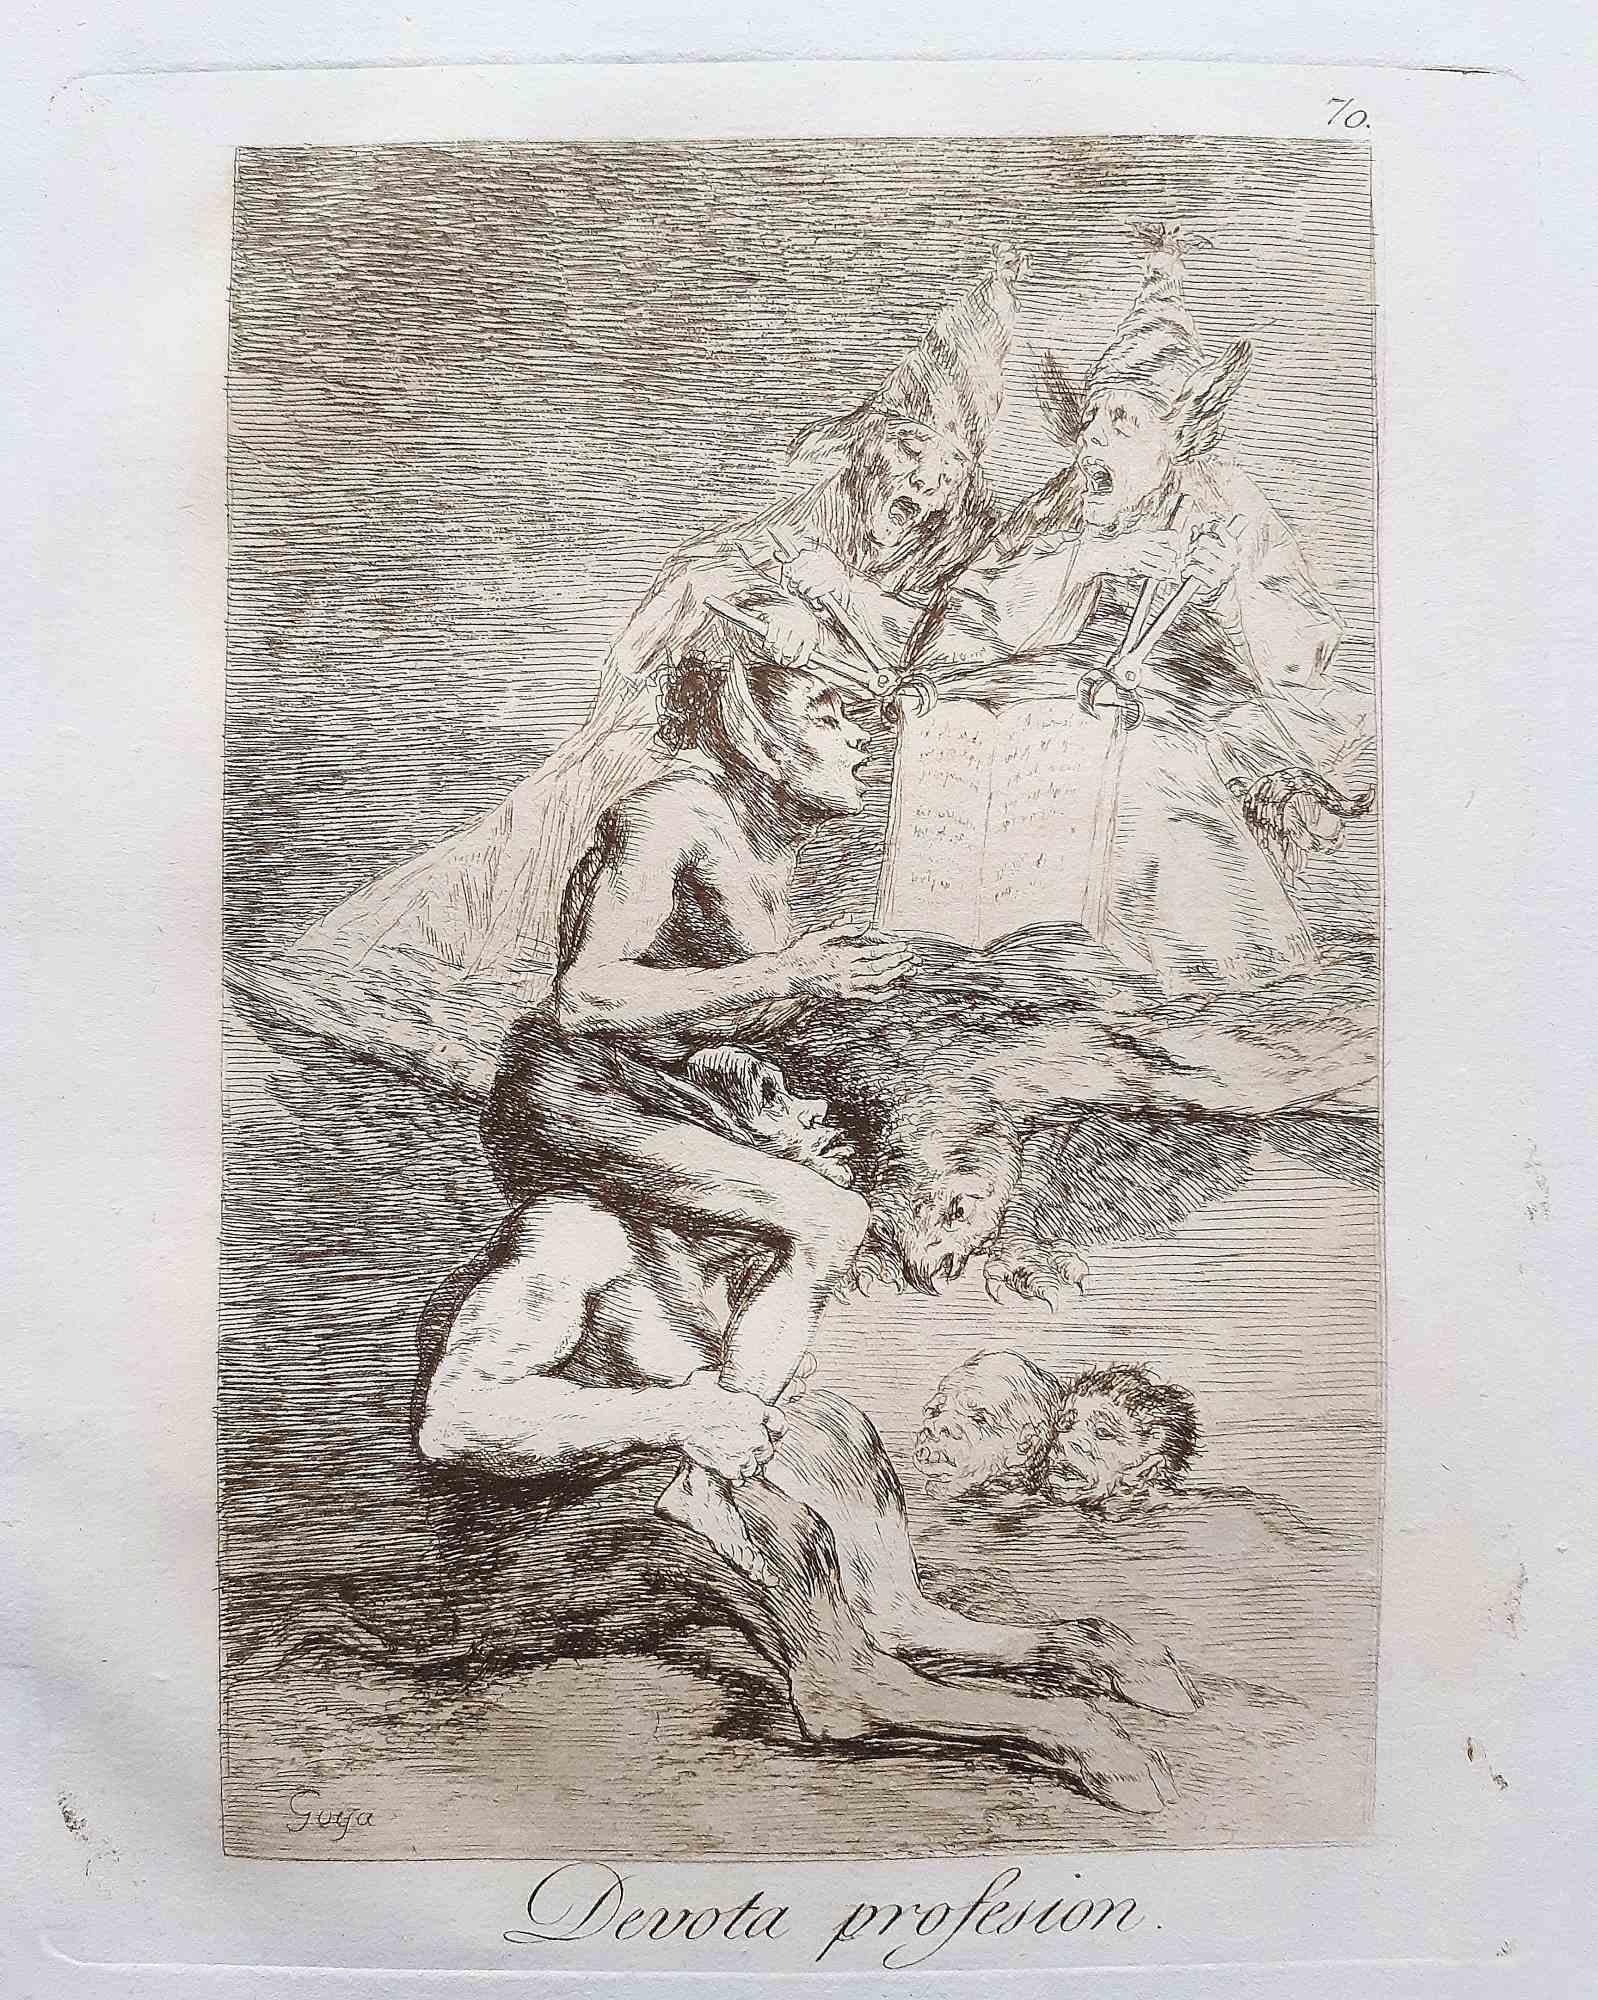 Devota Profesion from Los Caprichos - Etching by Francisco Goya - 1799 For Sale 2